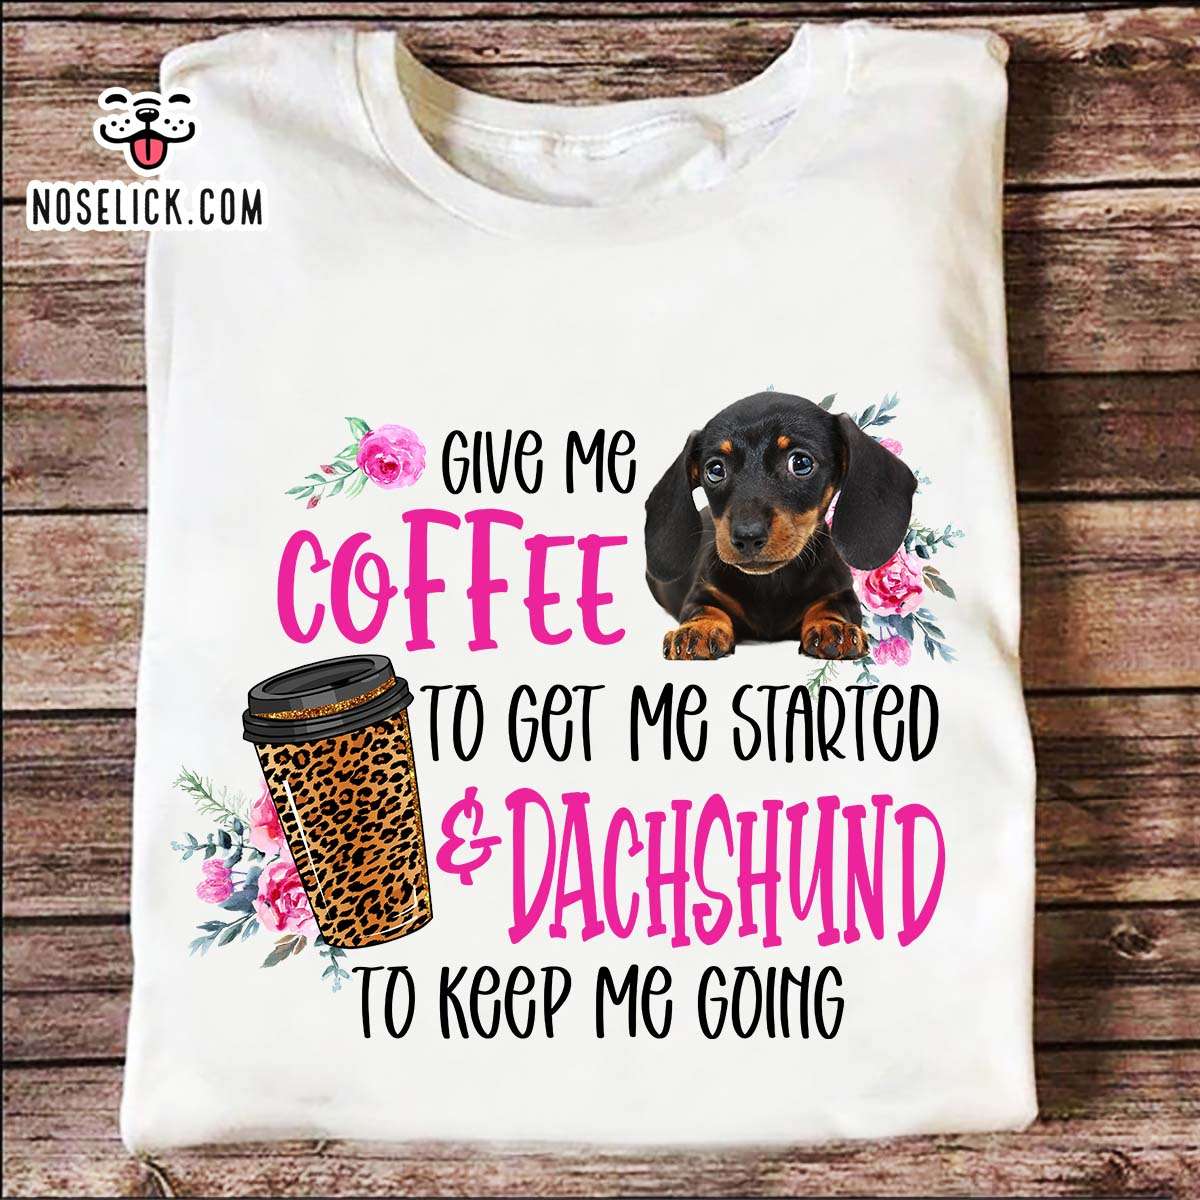 Give me coffee to get me started and Dachshund to keep me going - Dachshund and coffee